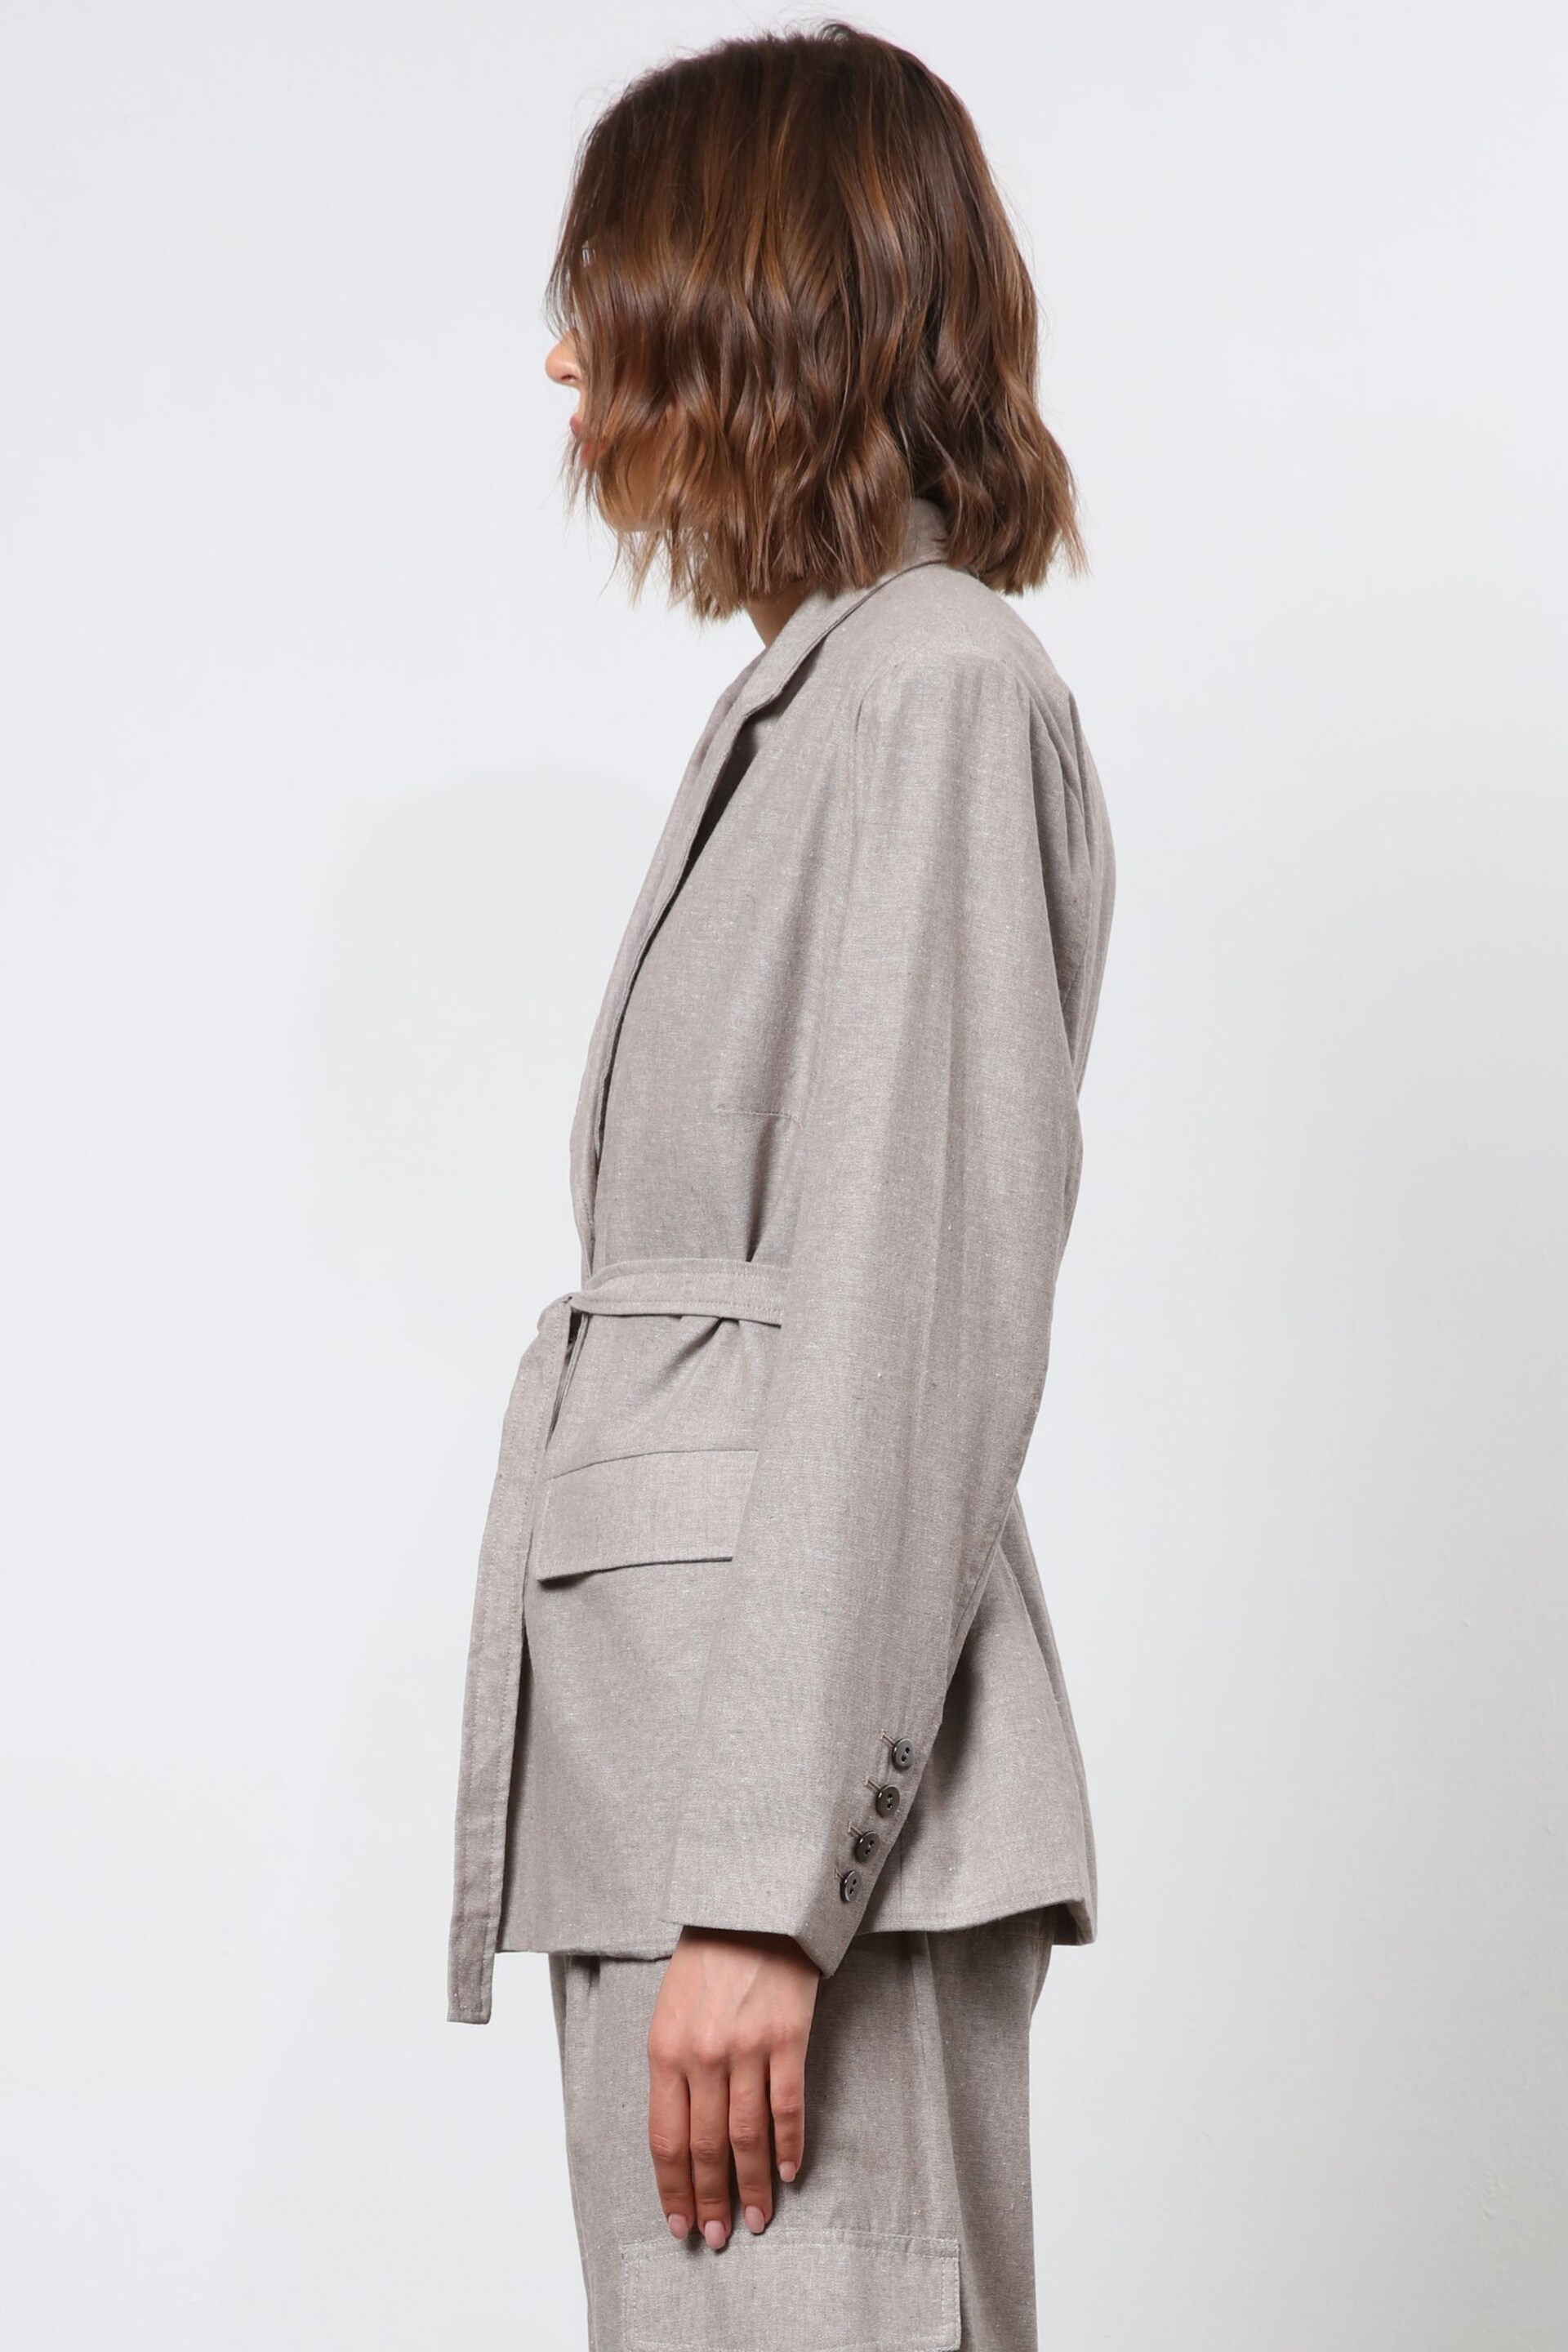 Religion Gray Belted Linen Mix Prime Blazer - Image 3 of 6